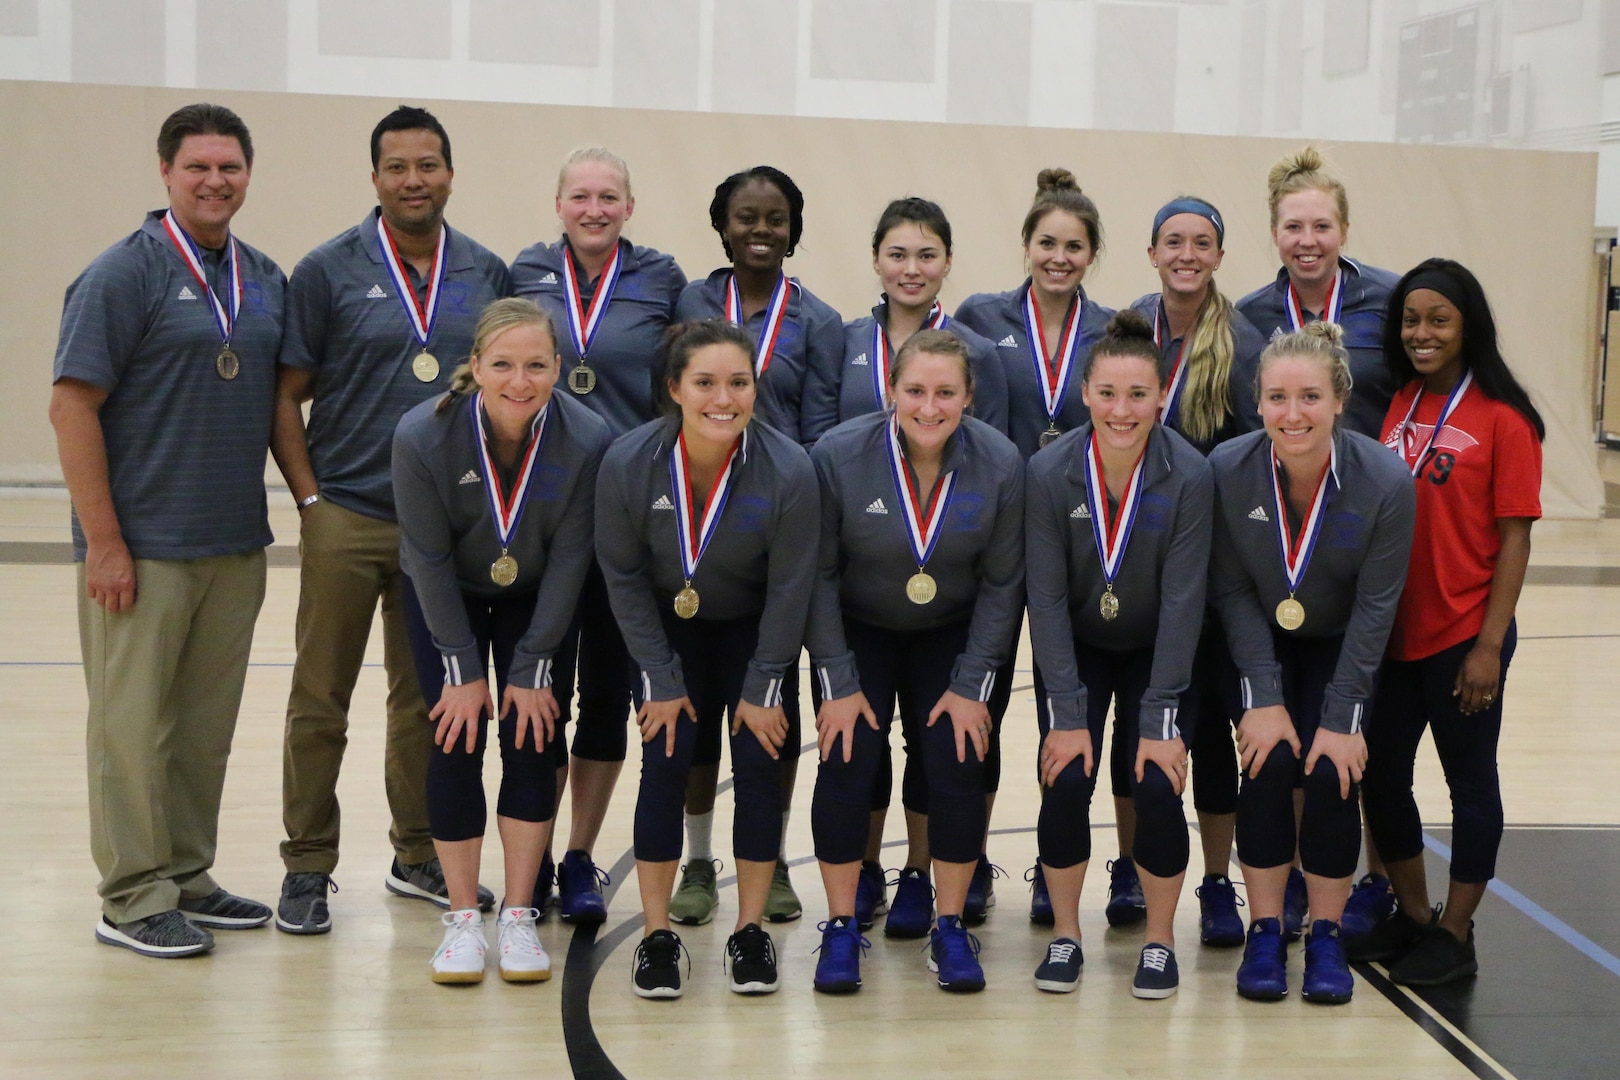 Air Force captures gold during the 2017 Armed Forces Women's Volleyball Championship at Naval Station Mayport, Florida on 20 May, after going 5-1 against the Navy and Army.